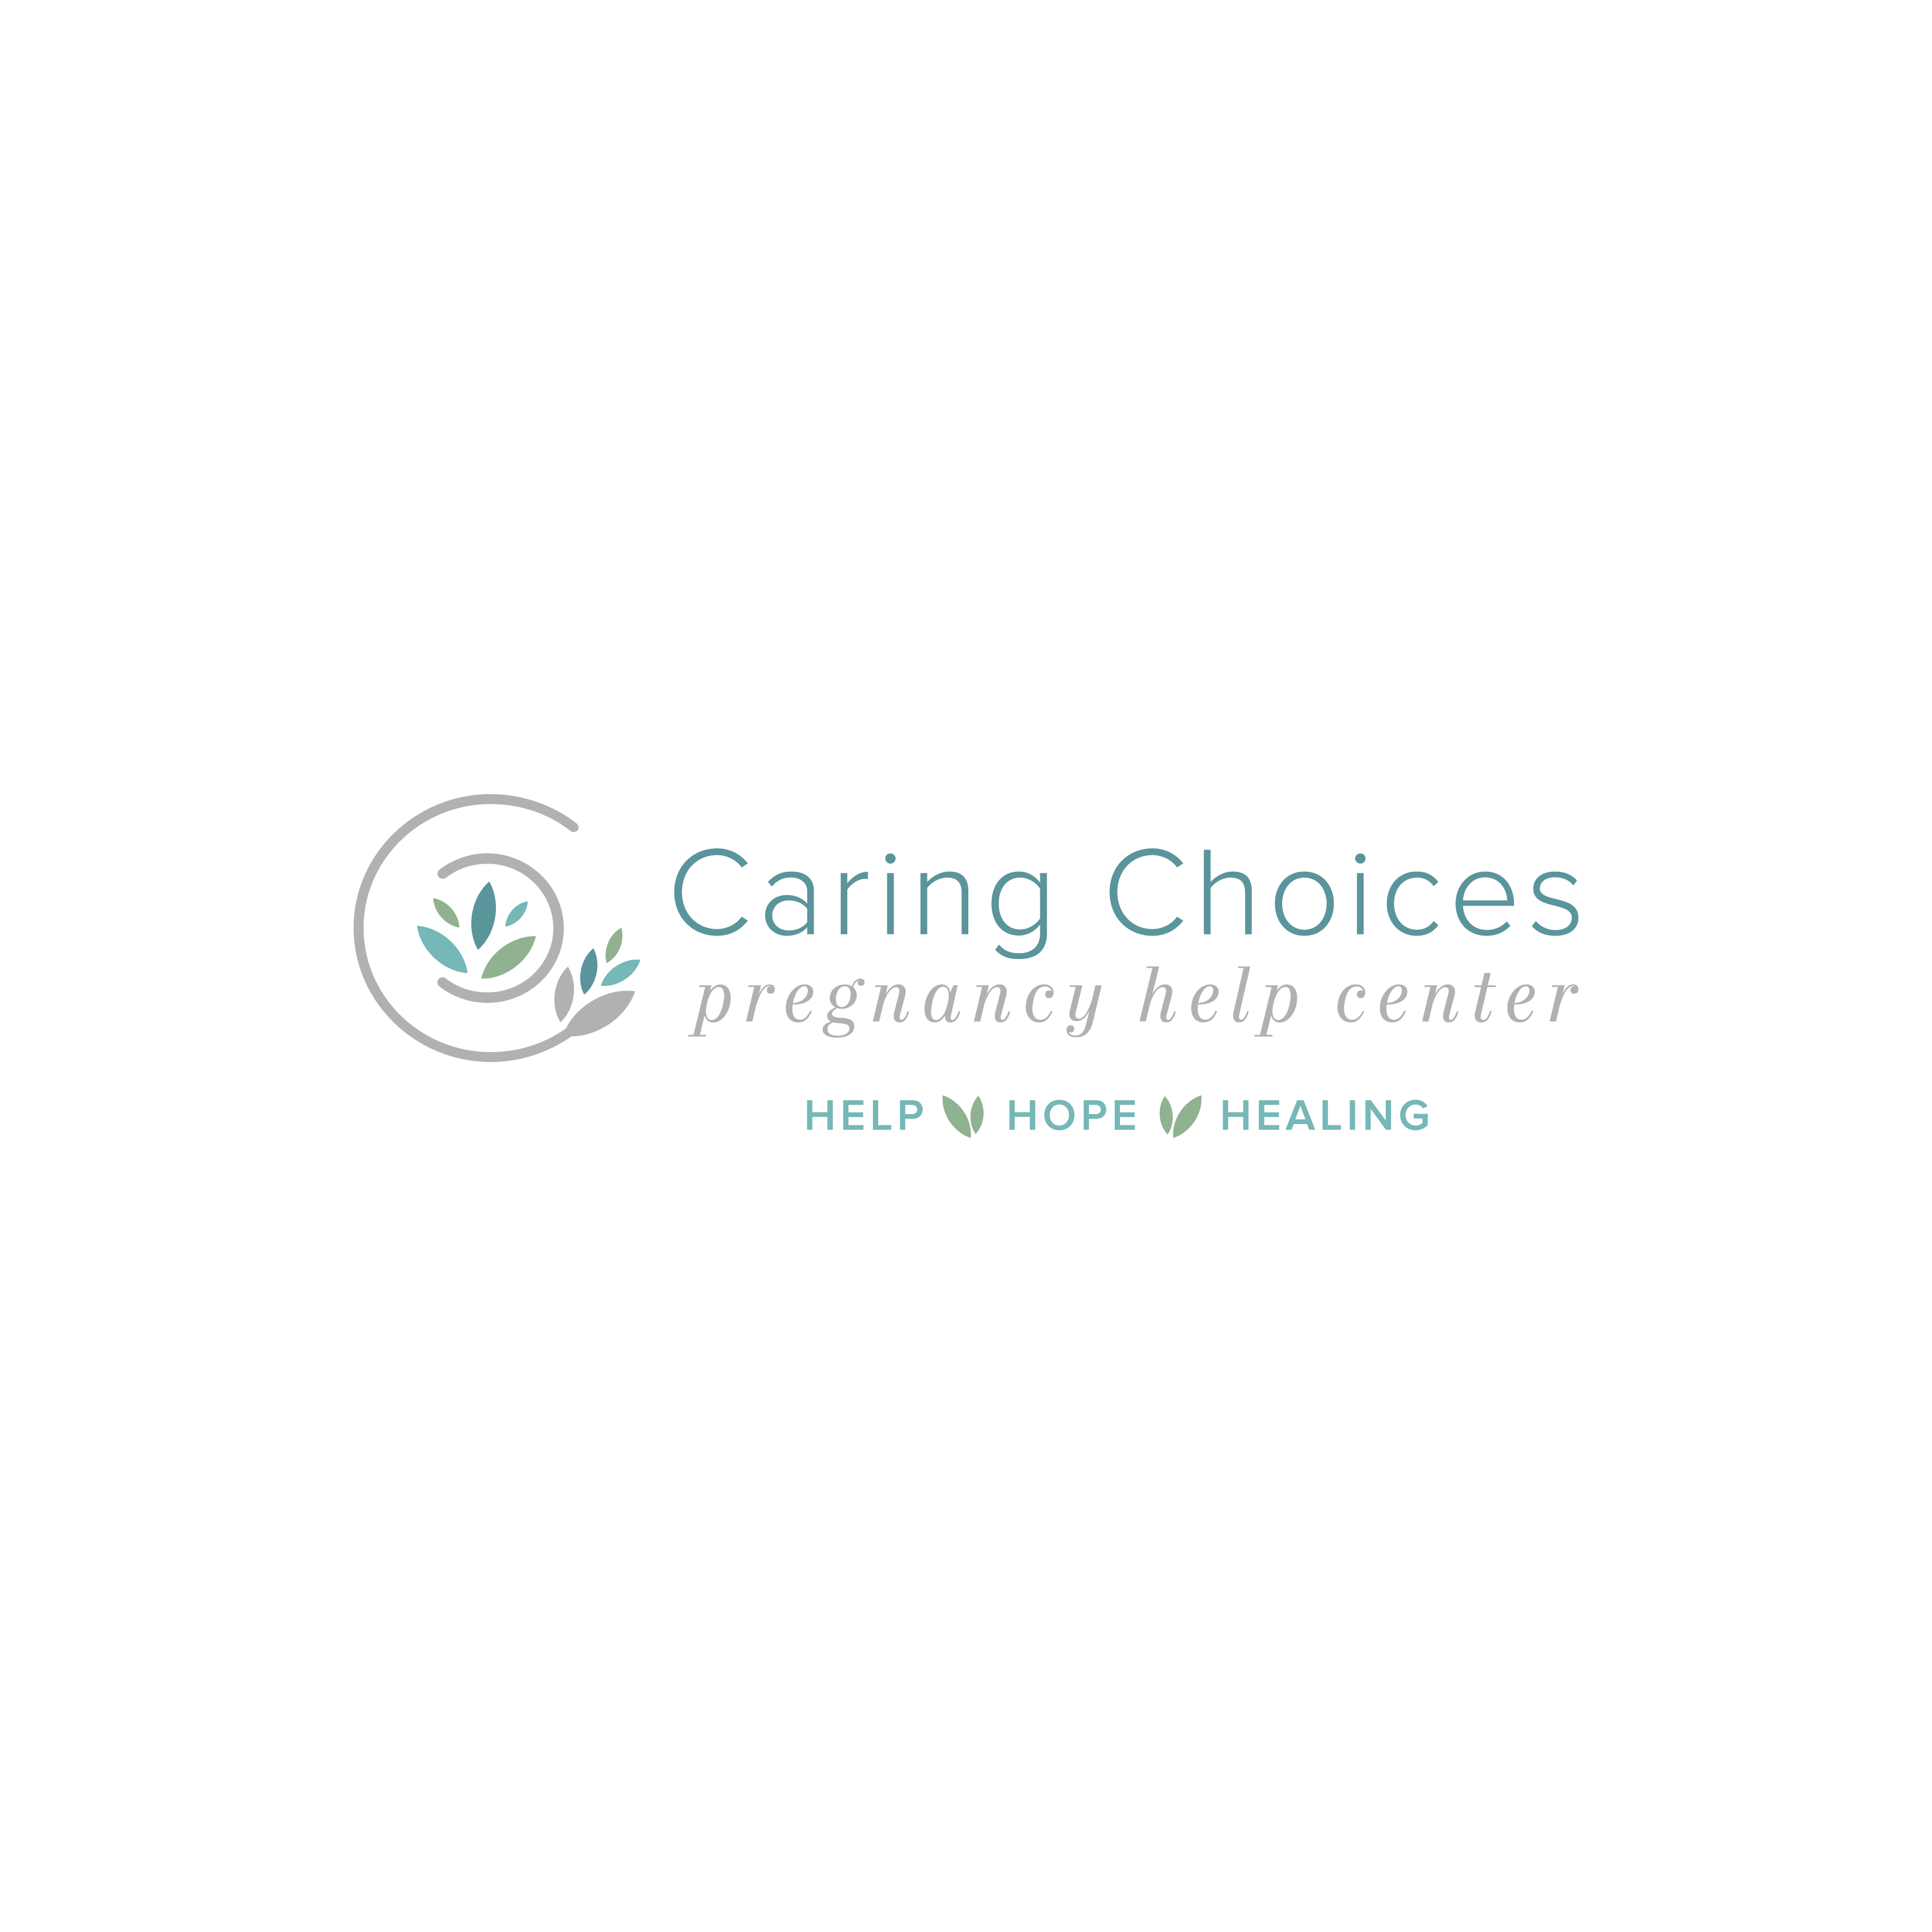 Caring Choices